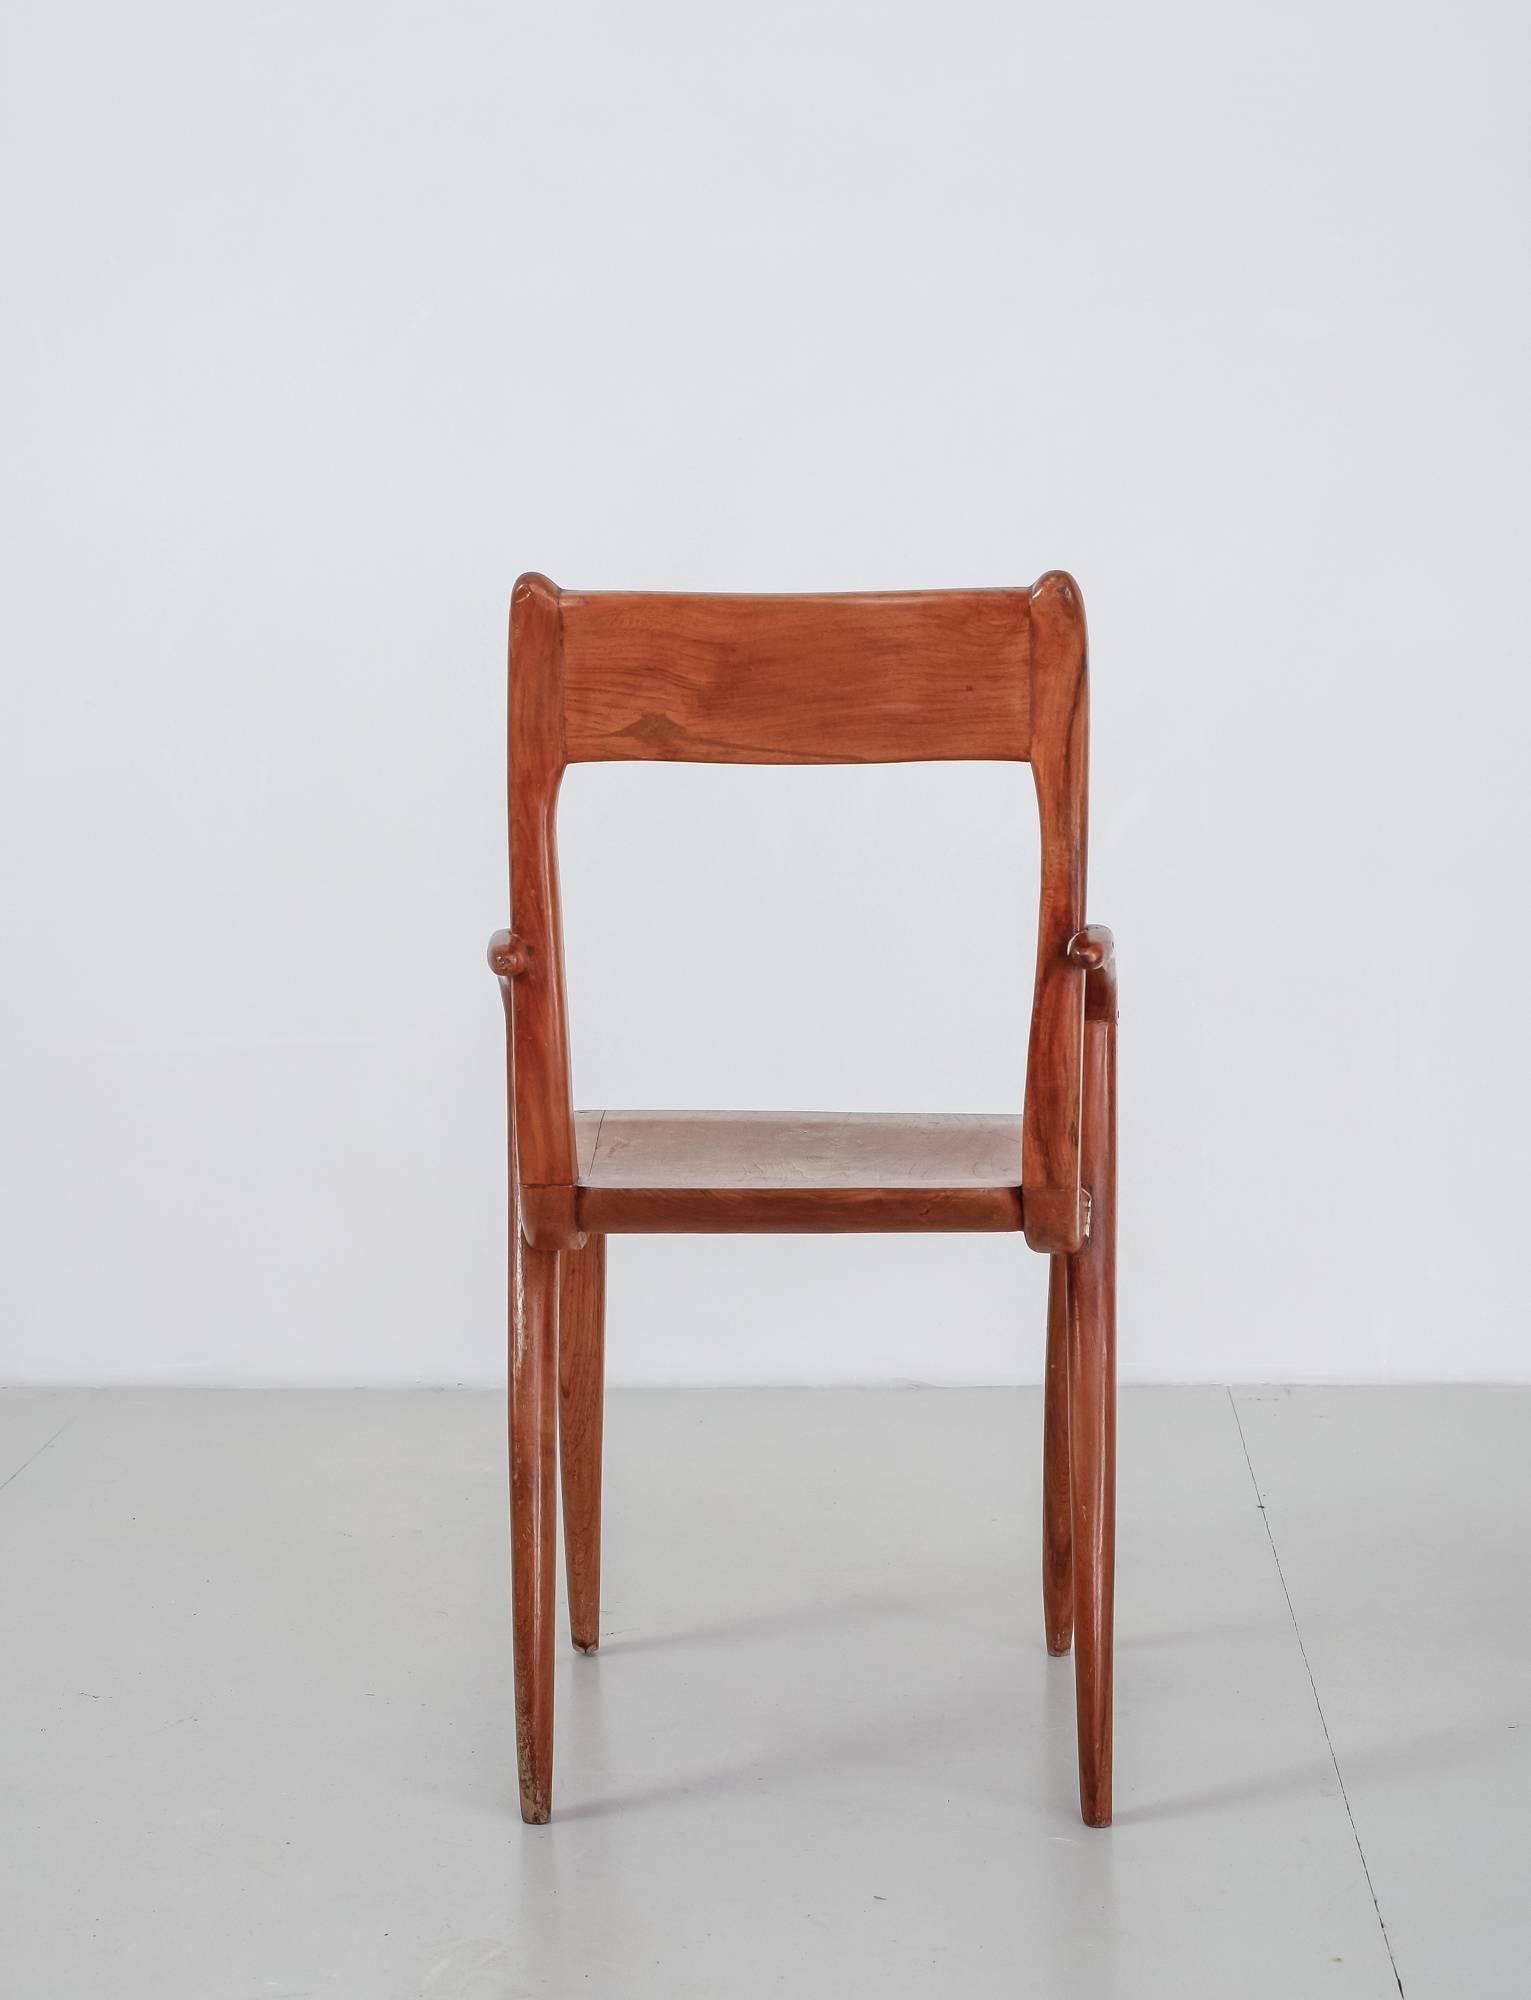 Mid-20th Century American Sculptural, Organic Wooden Craft Chair, 1950s For Sale